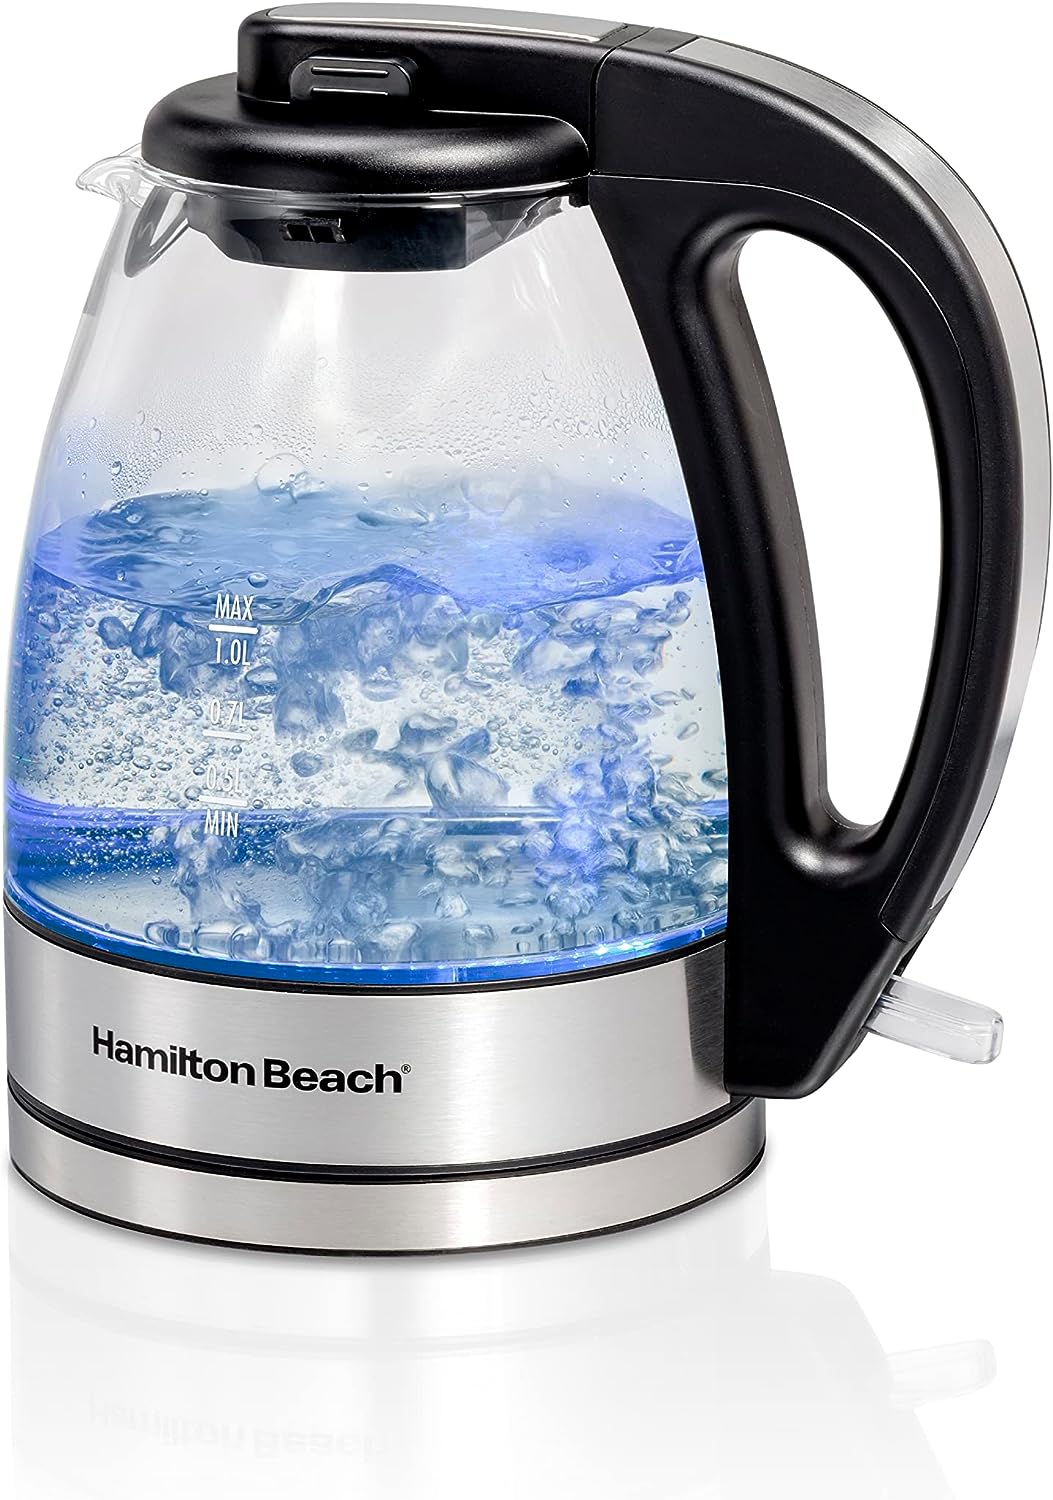 Hamilton Beach Glass Electric Tea Kettle, Water Boiler  Heater, 1 Liter, 1500 Watts for Fast Boiling, BPA Free, Cordless Serving, Auto-Shutoff  Boil-Dry Protection, Soft Blue LED (40930)